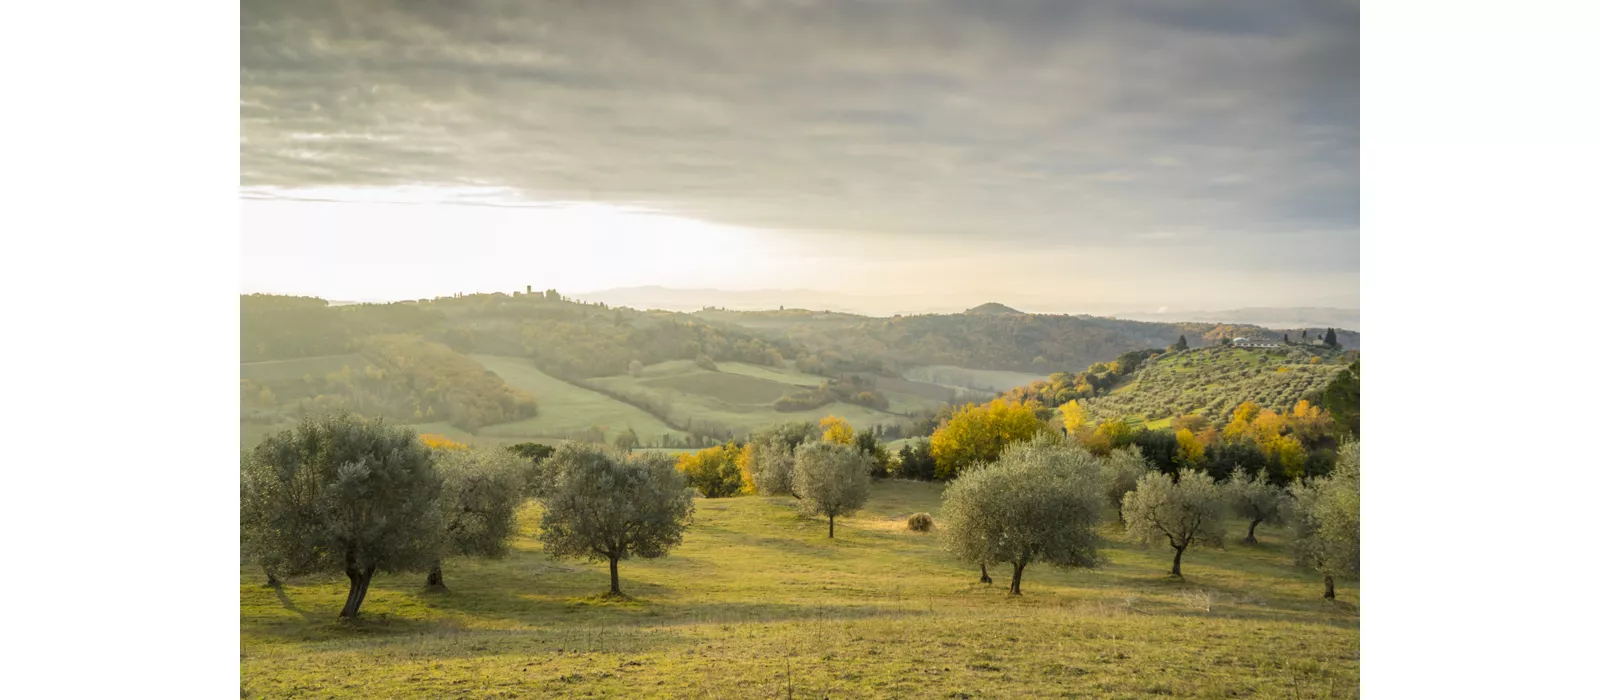 Tuscany's extra virgin olive oil villages